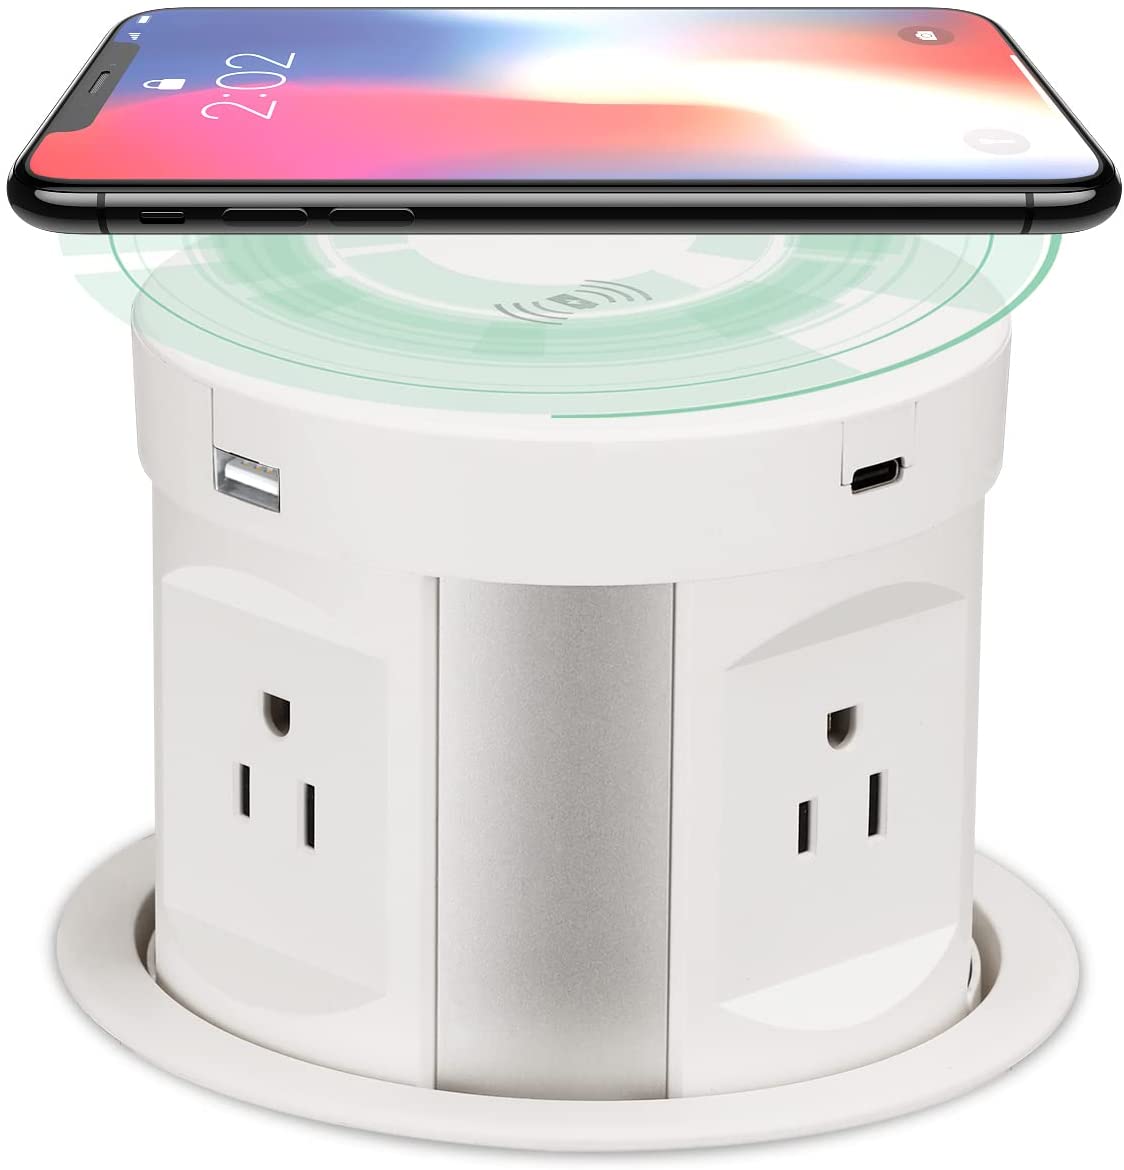 USB and wireless chargers and USB with sockets